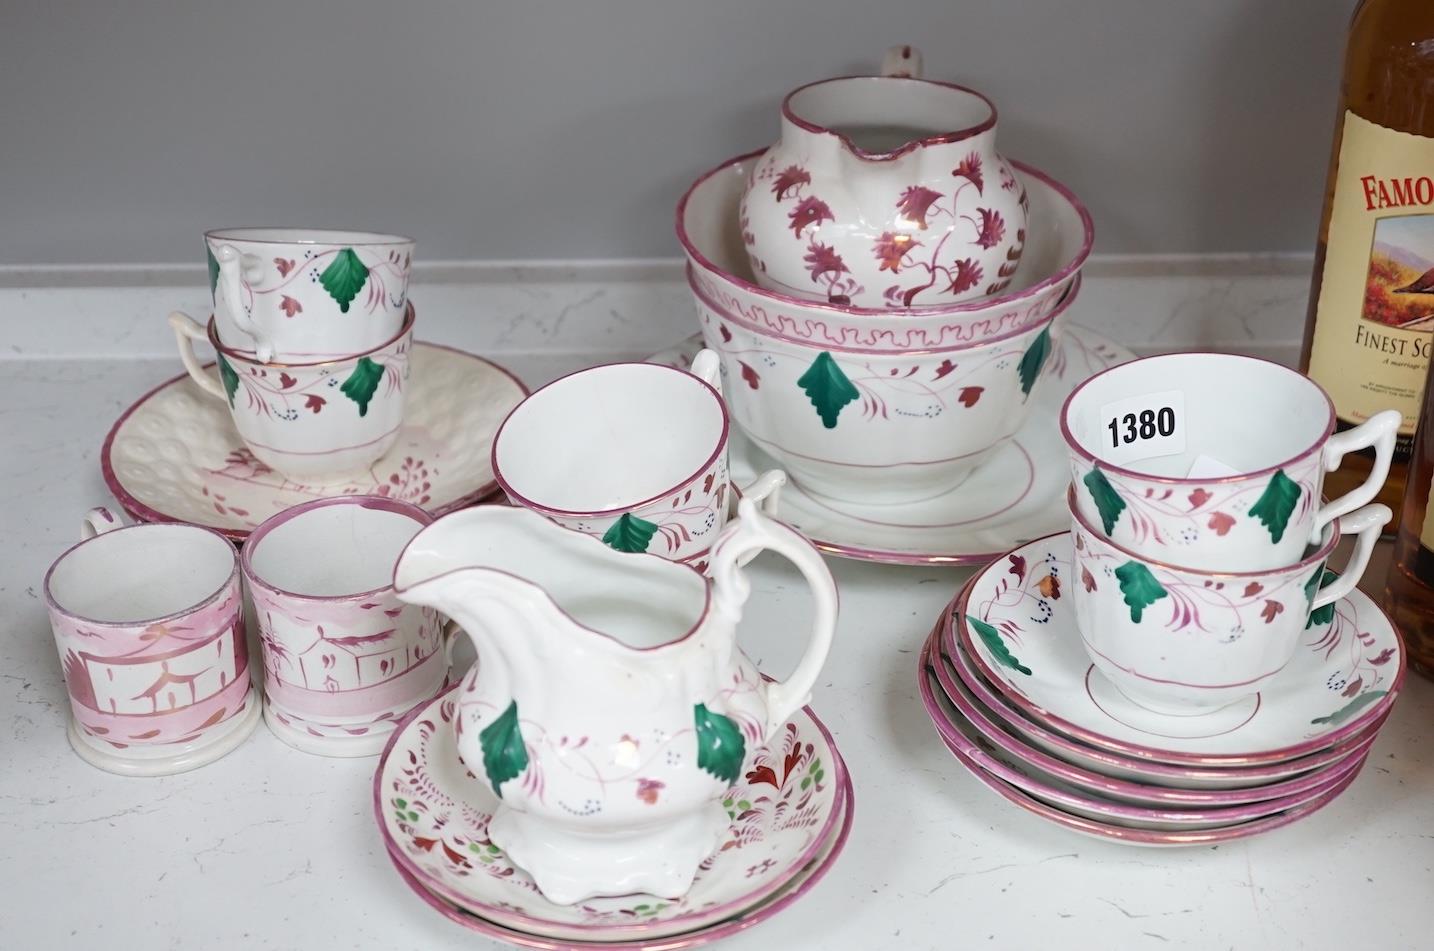 A collection of Welsh or English pink lustre pottery tea wares, first half 19th century - Image 2 of 5